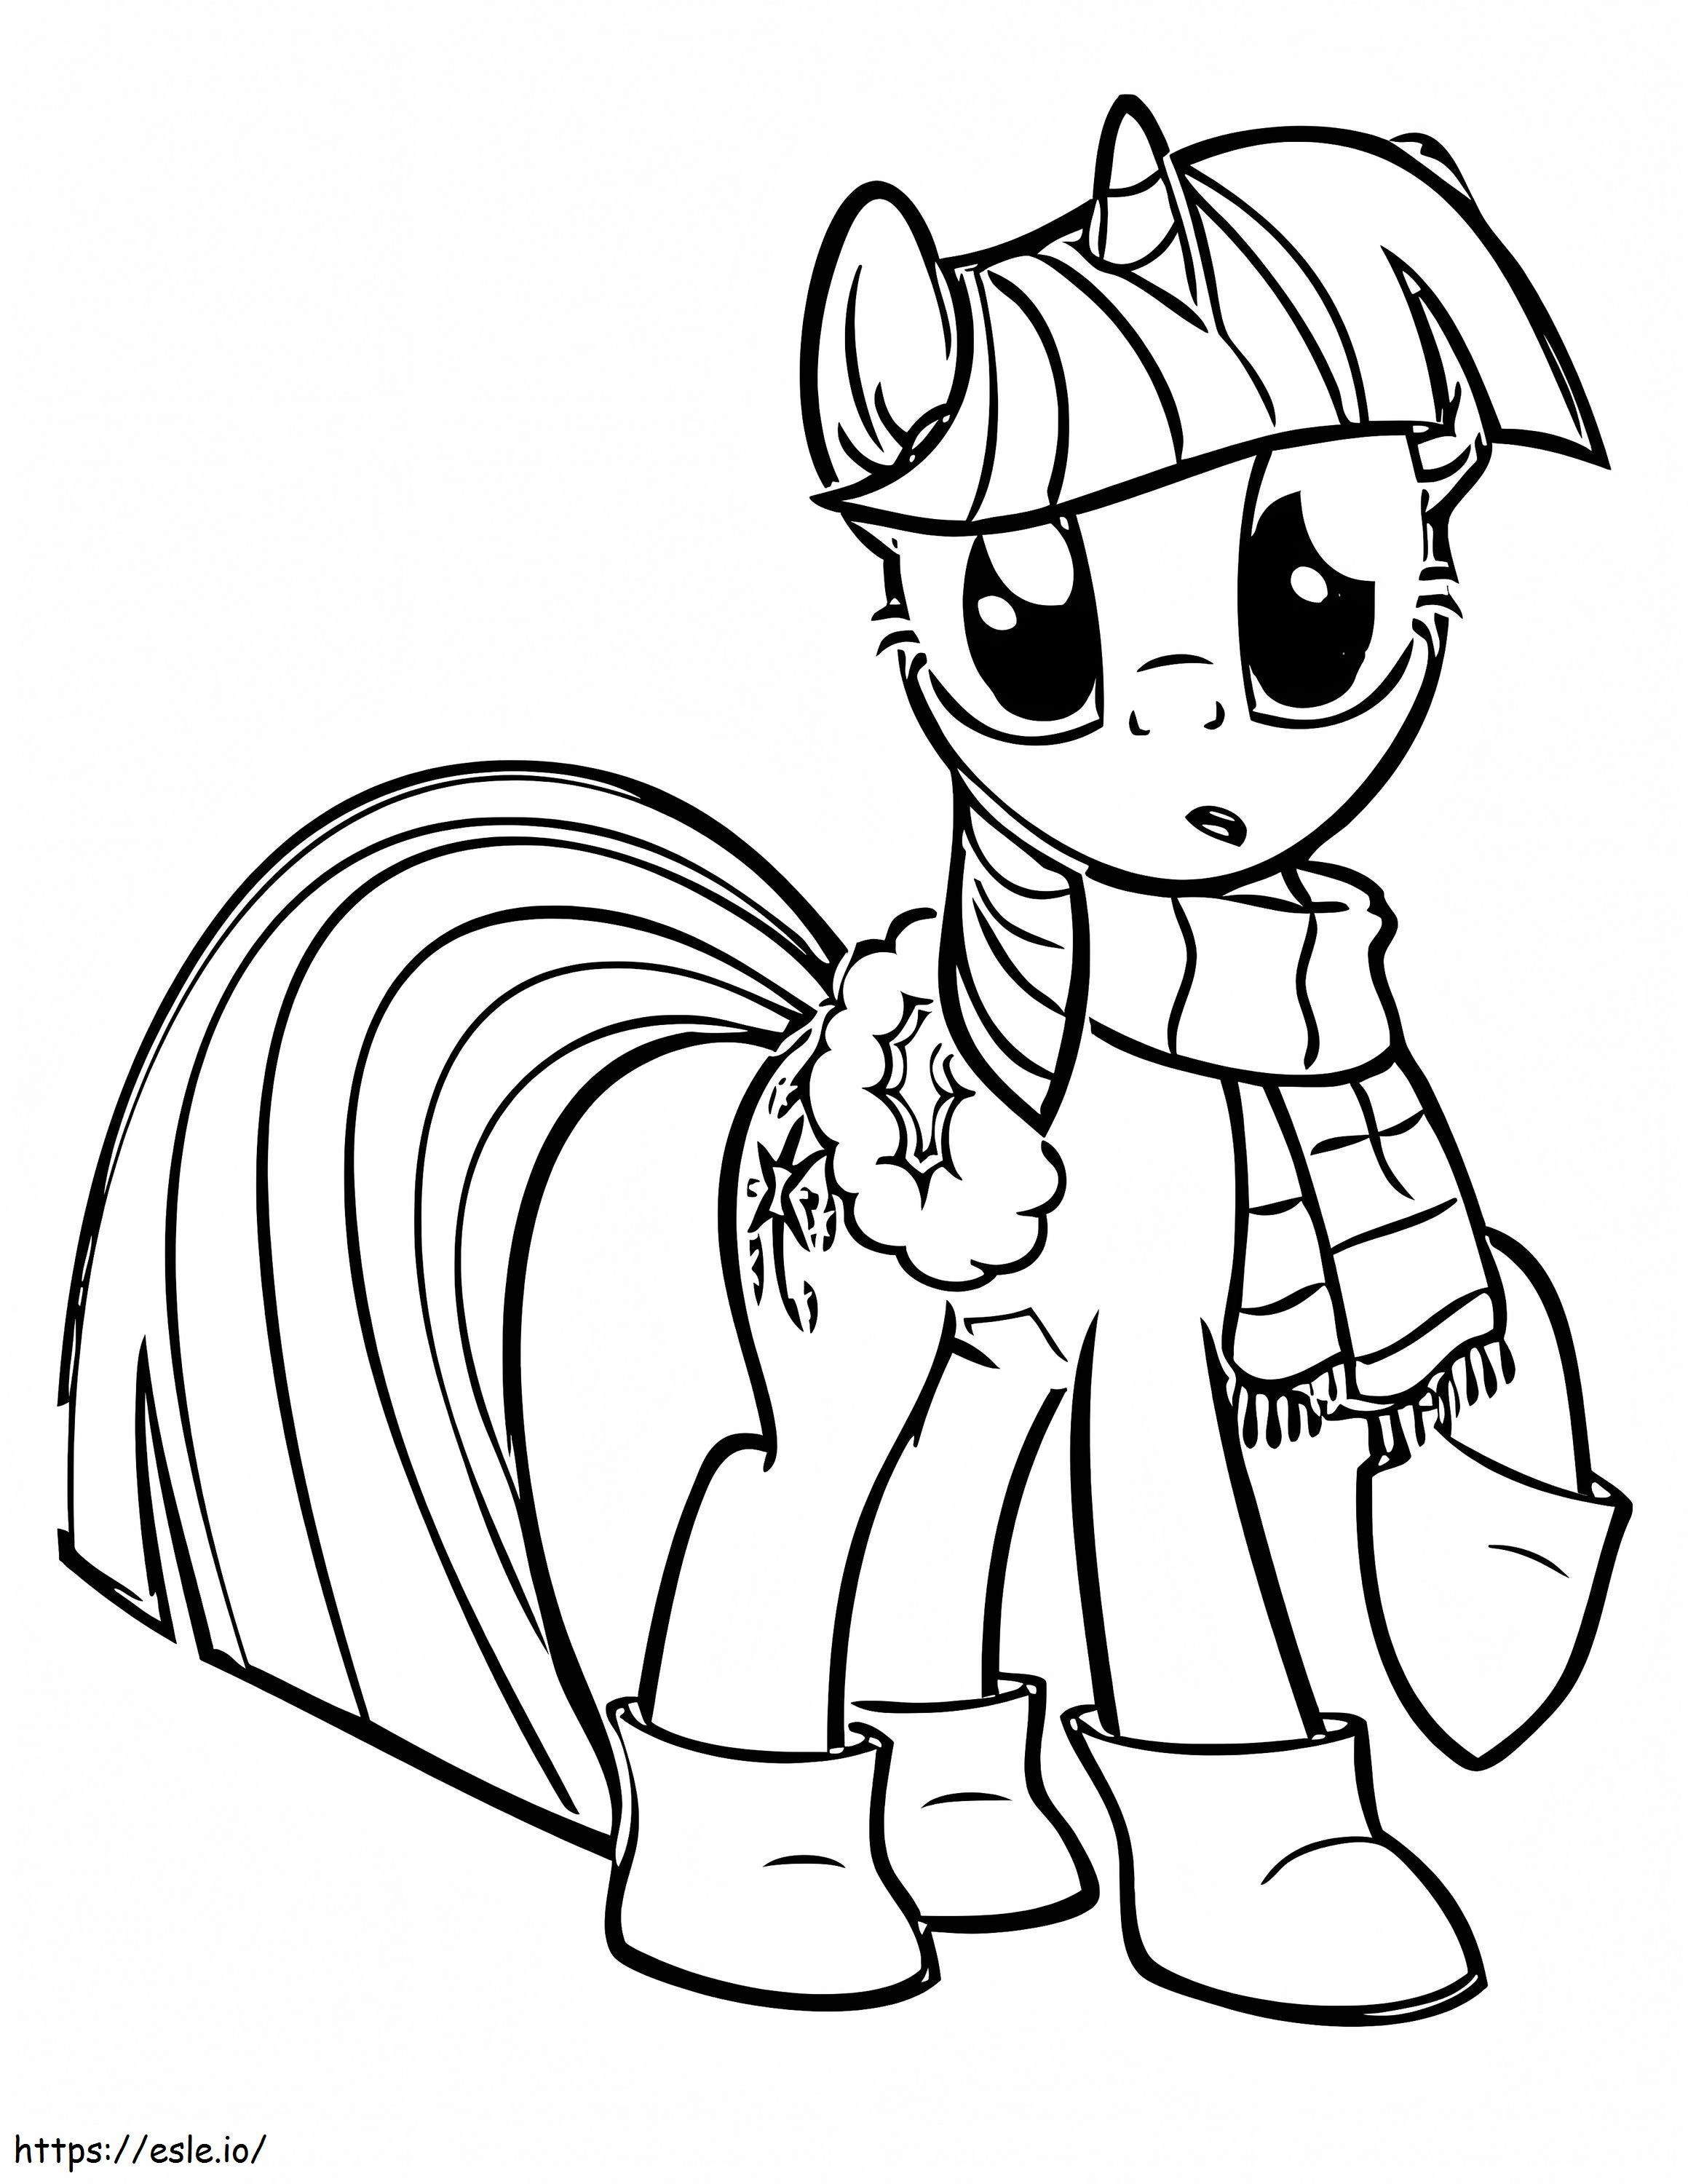 Funny Twilight Sparkle coloring page